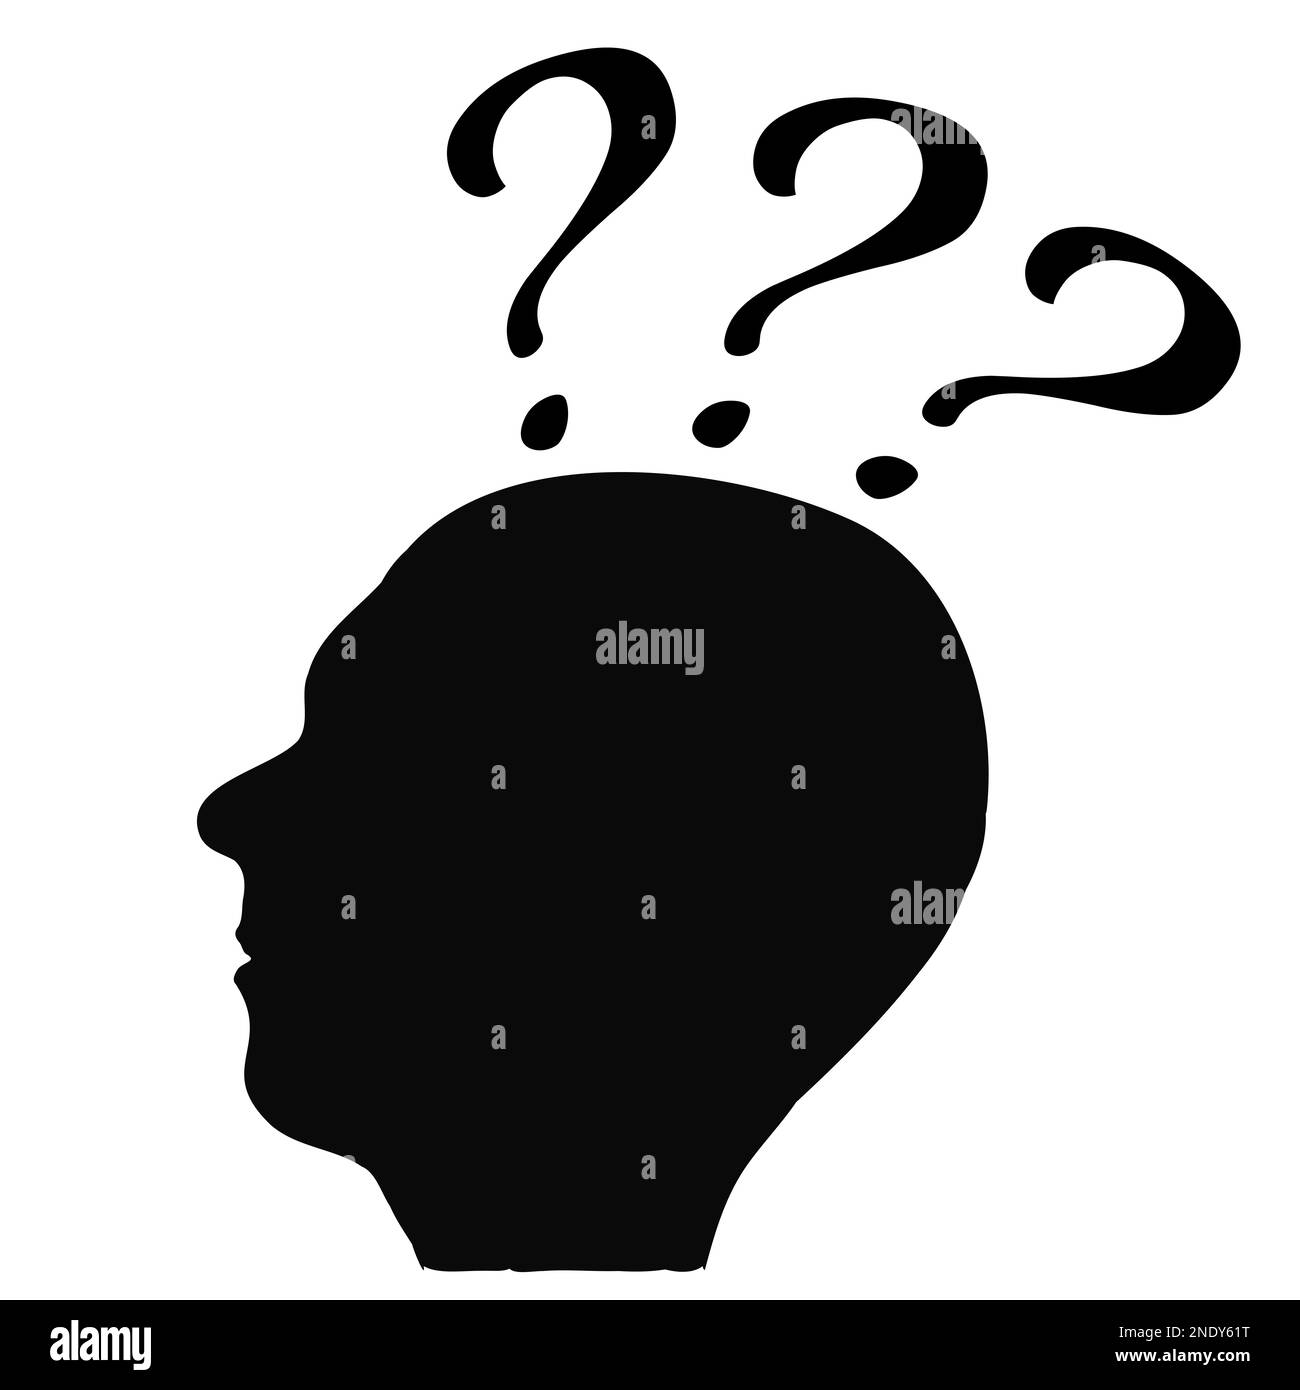 Head in profile with a question mark, illustration